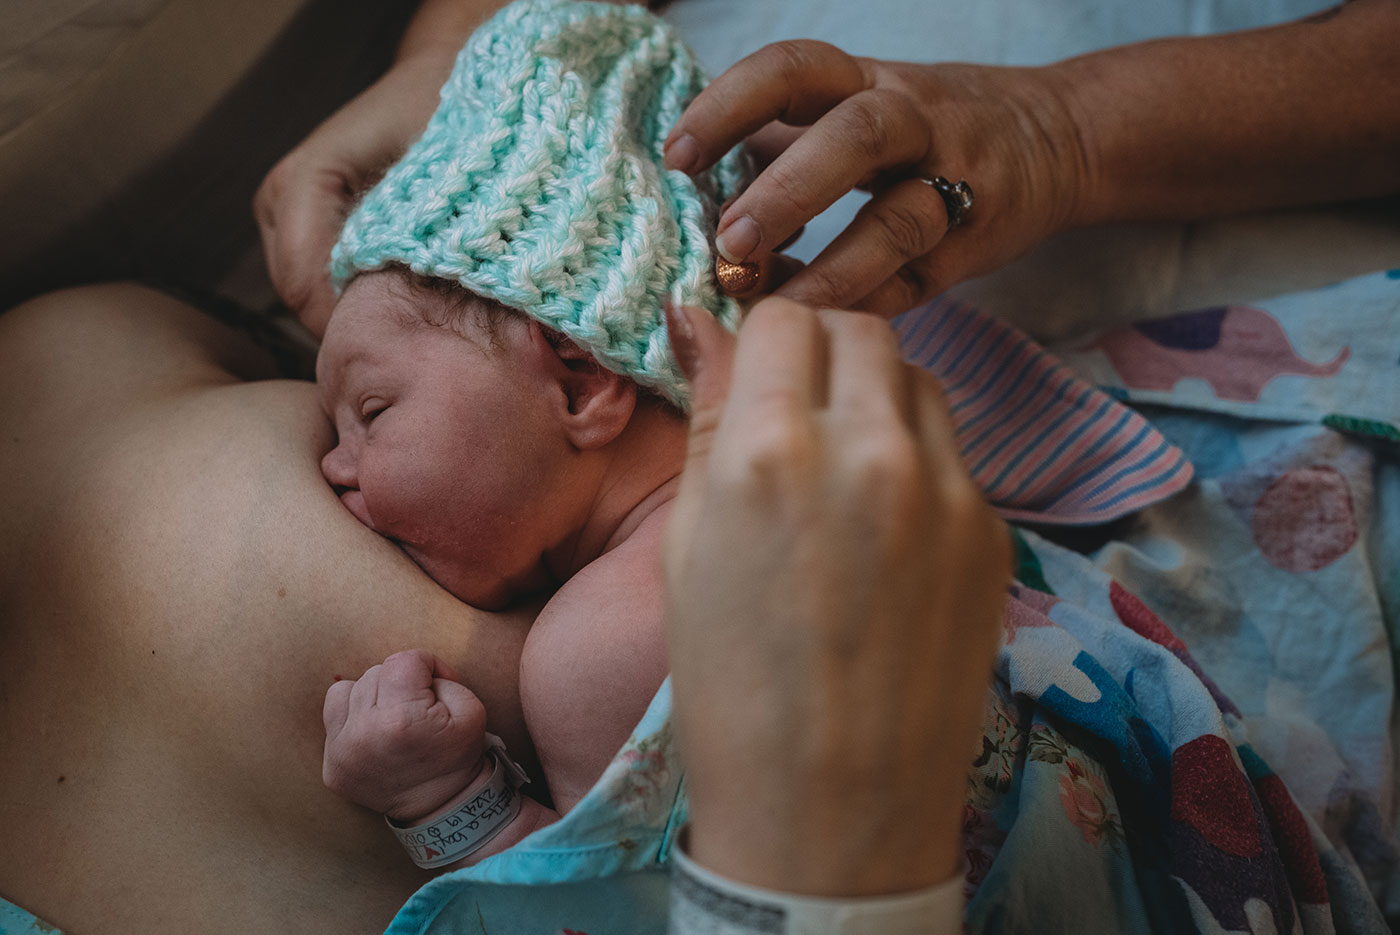 grandma puts a hand-made hat on breastfeeding baby's head after birth